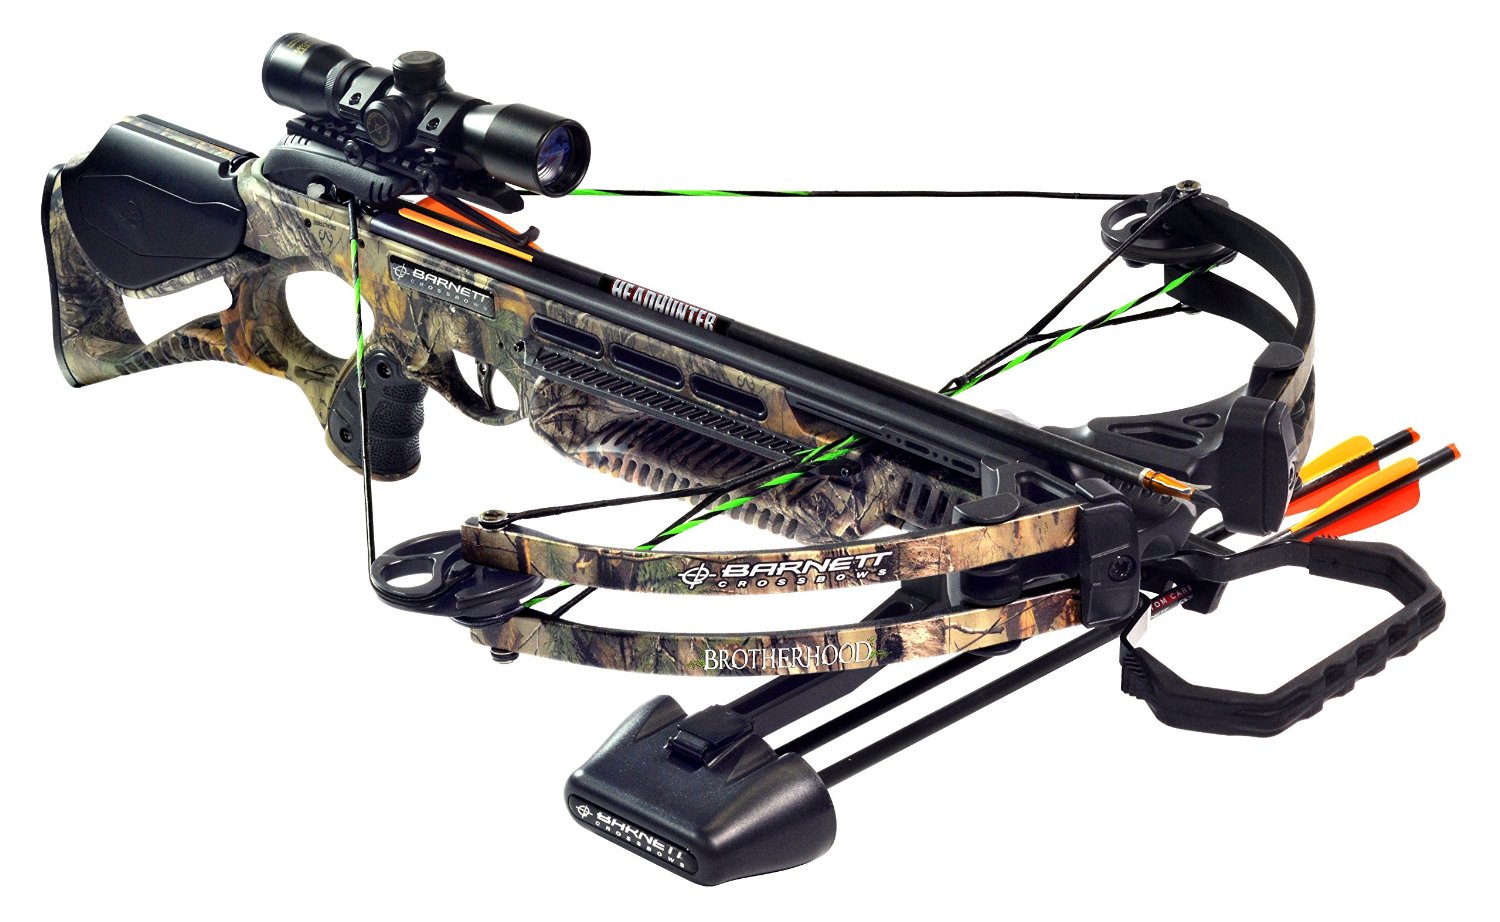 Best Crossbow For The Money & 2017 Crossbow Reviews